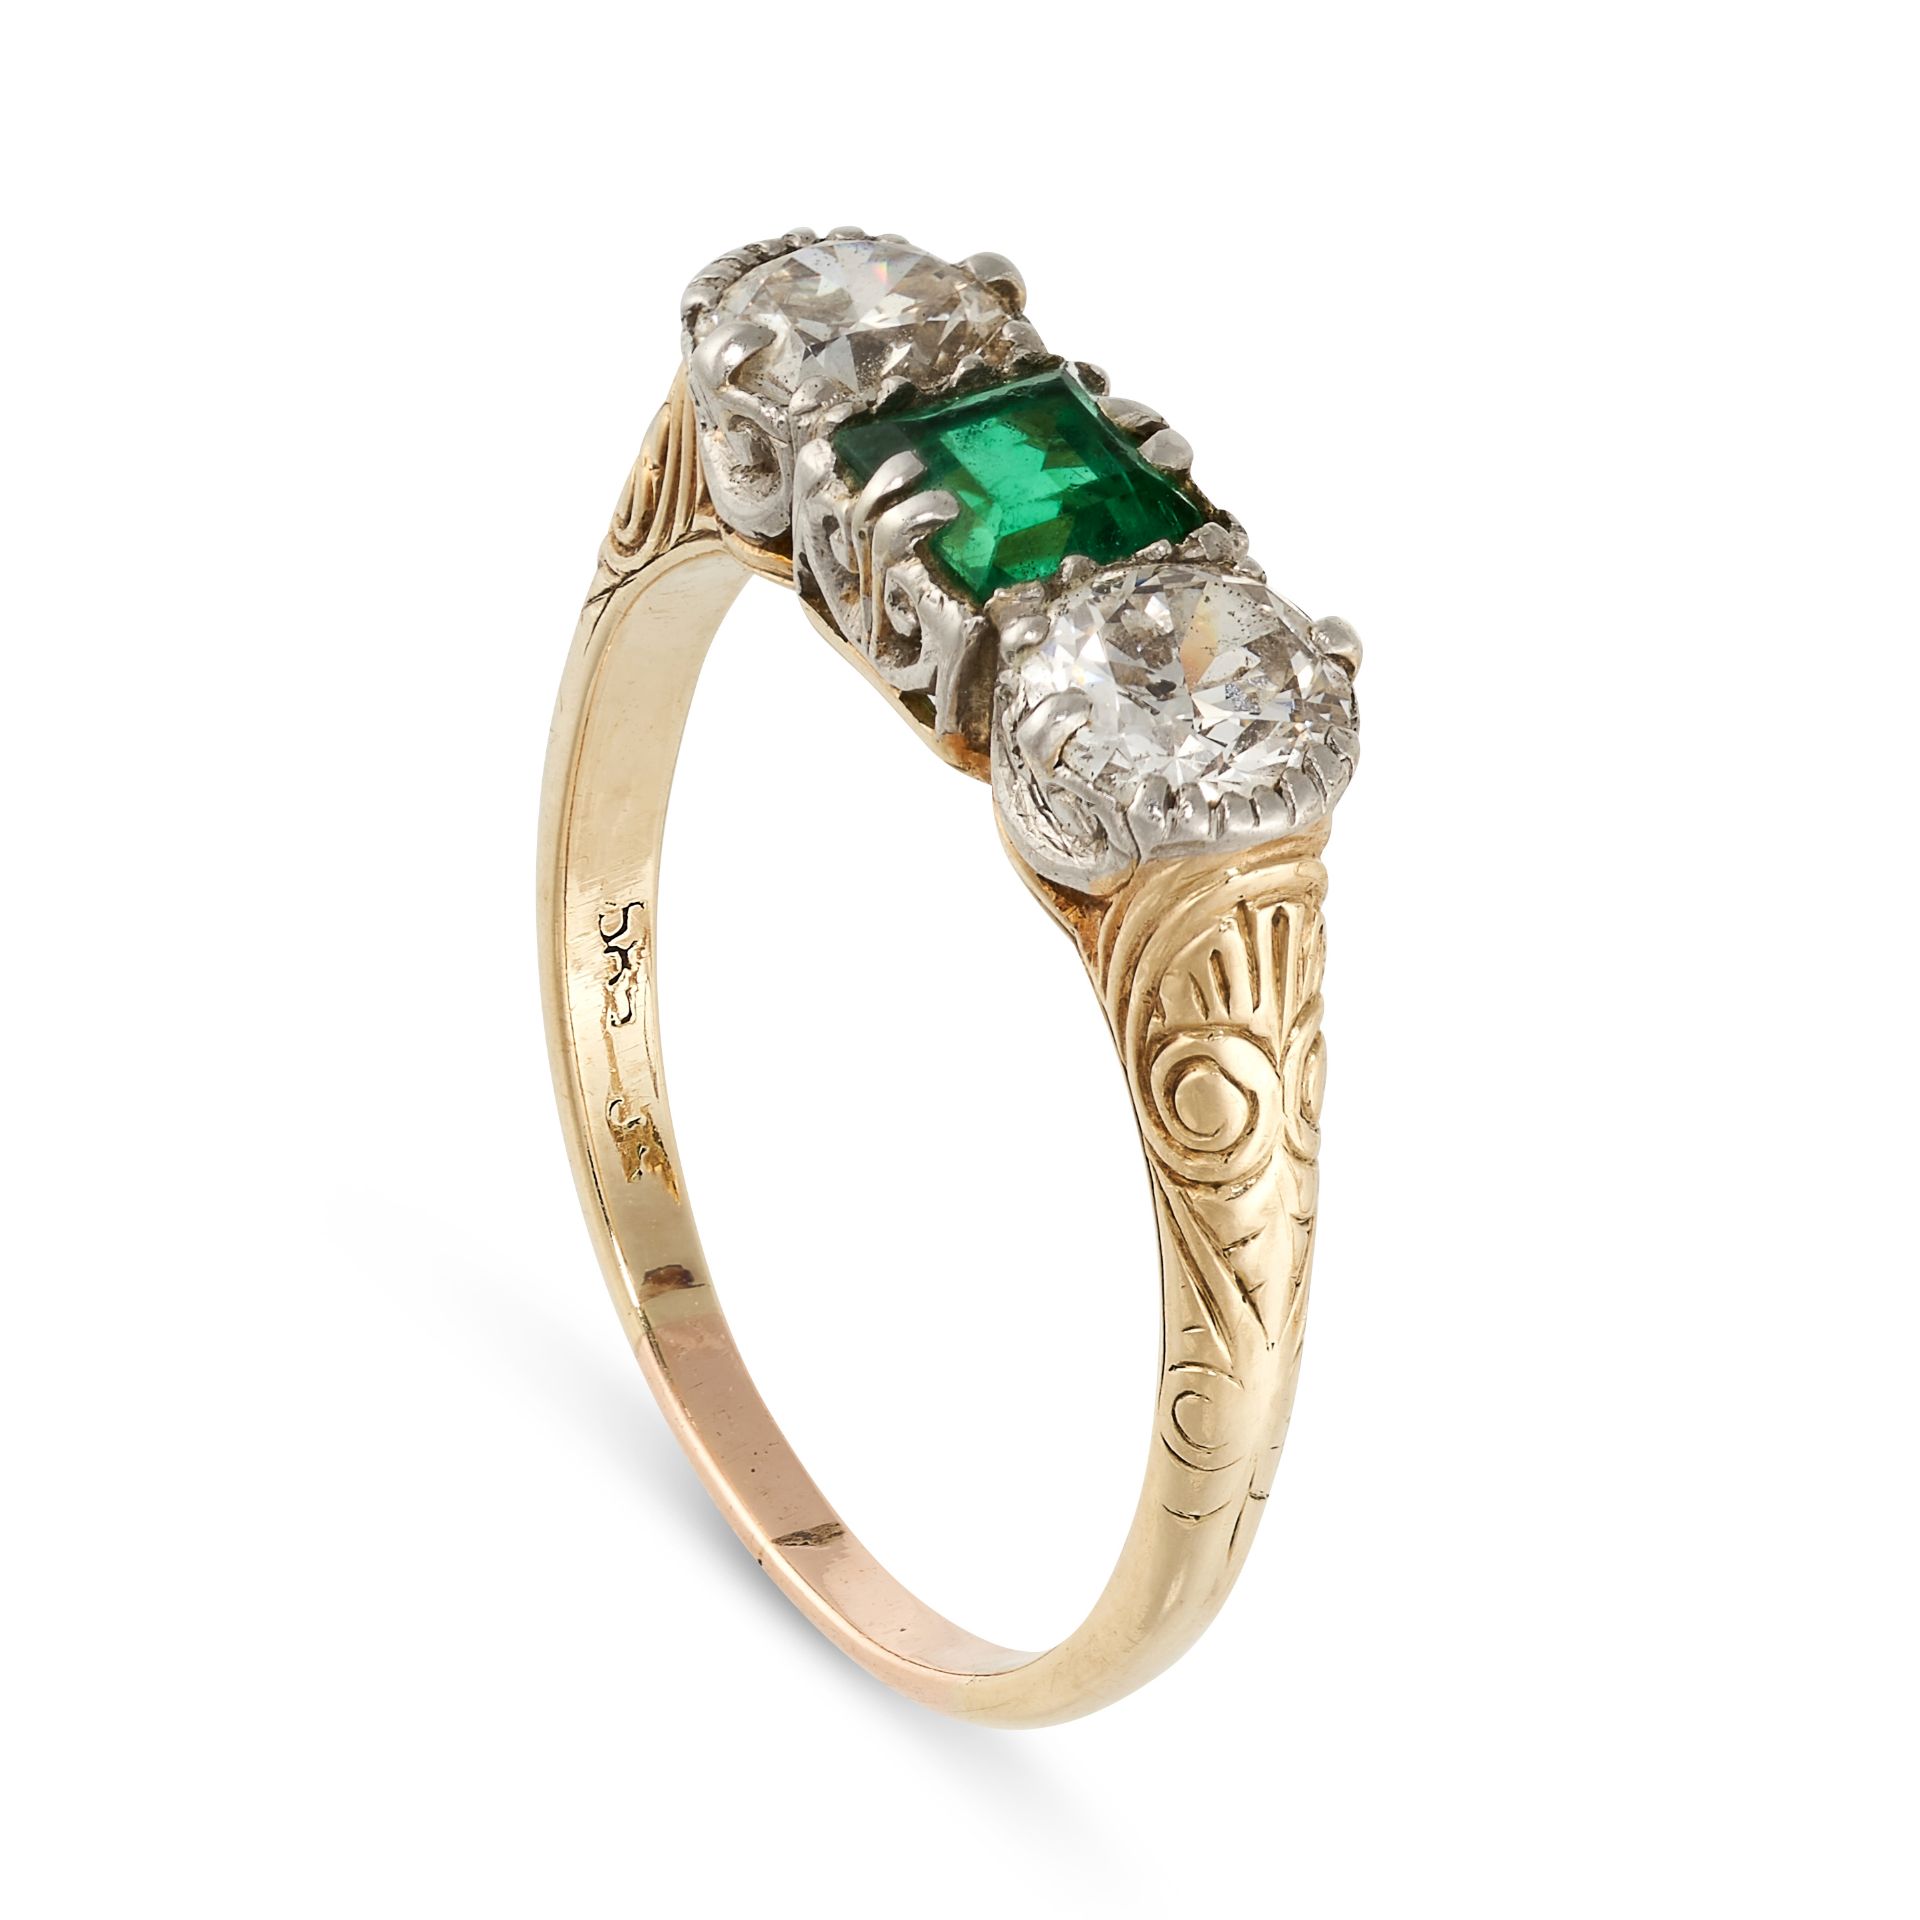 NO RESERVE - A VINTAGE EMERALD AND DIAMOND RING, CIRCA 1950 in 14ct yellow gold, set with a square - Image 2 of 2